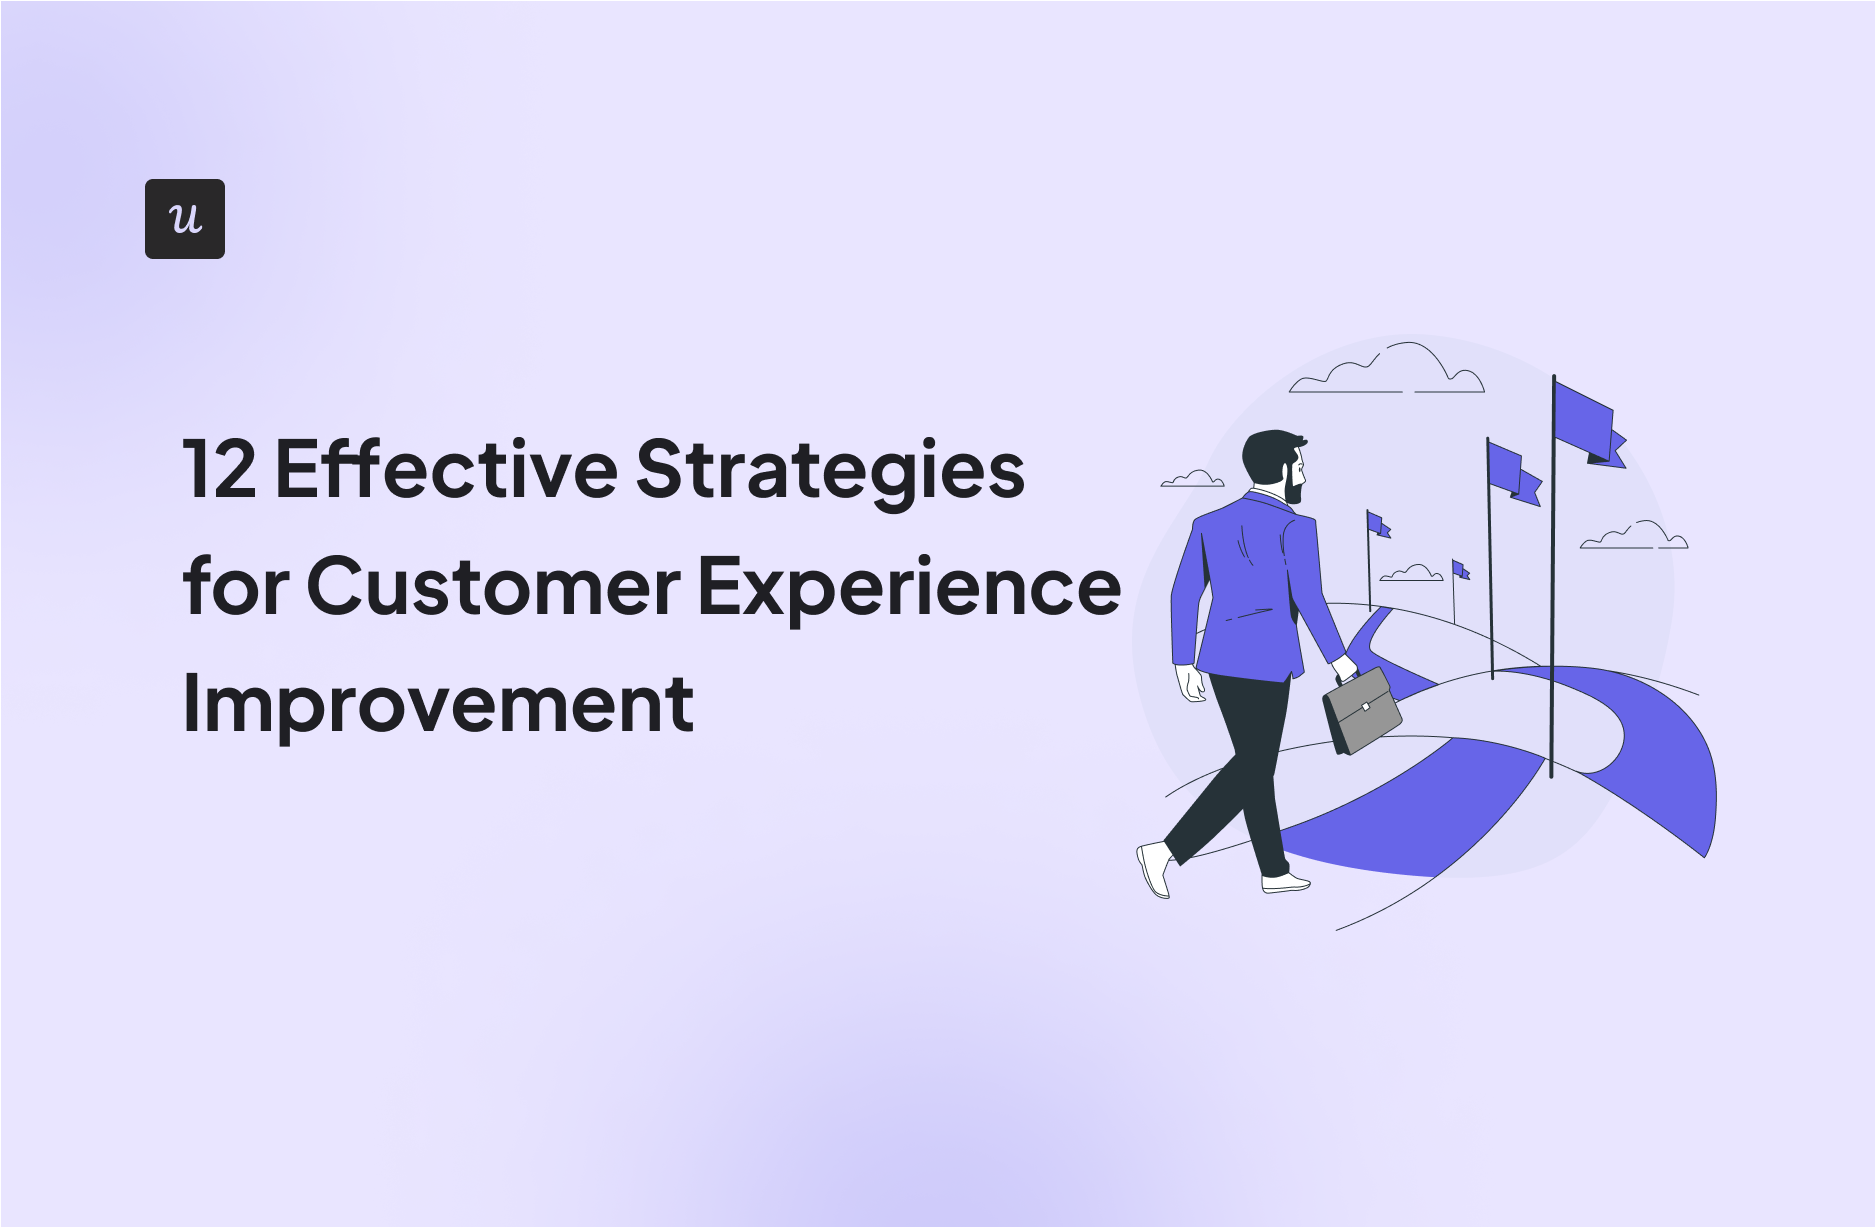 12 Effective Strategies for Customer Experience Improvement